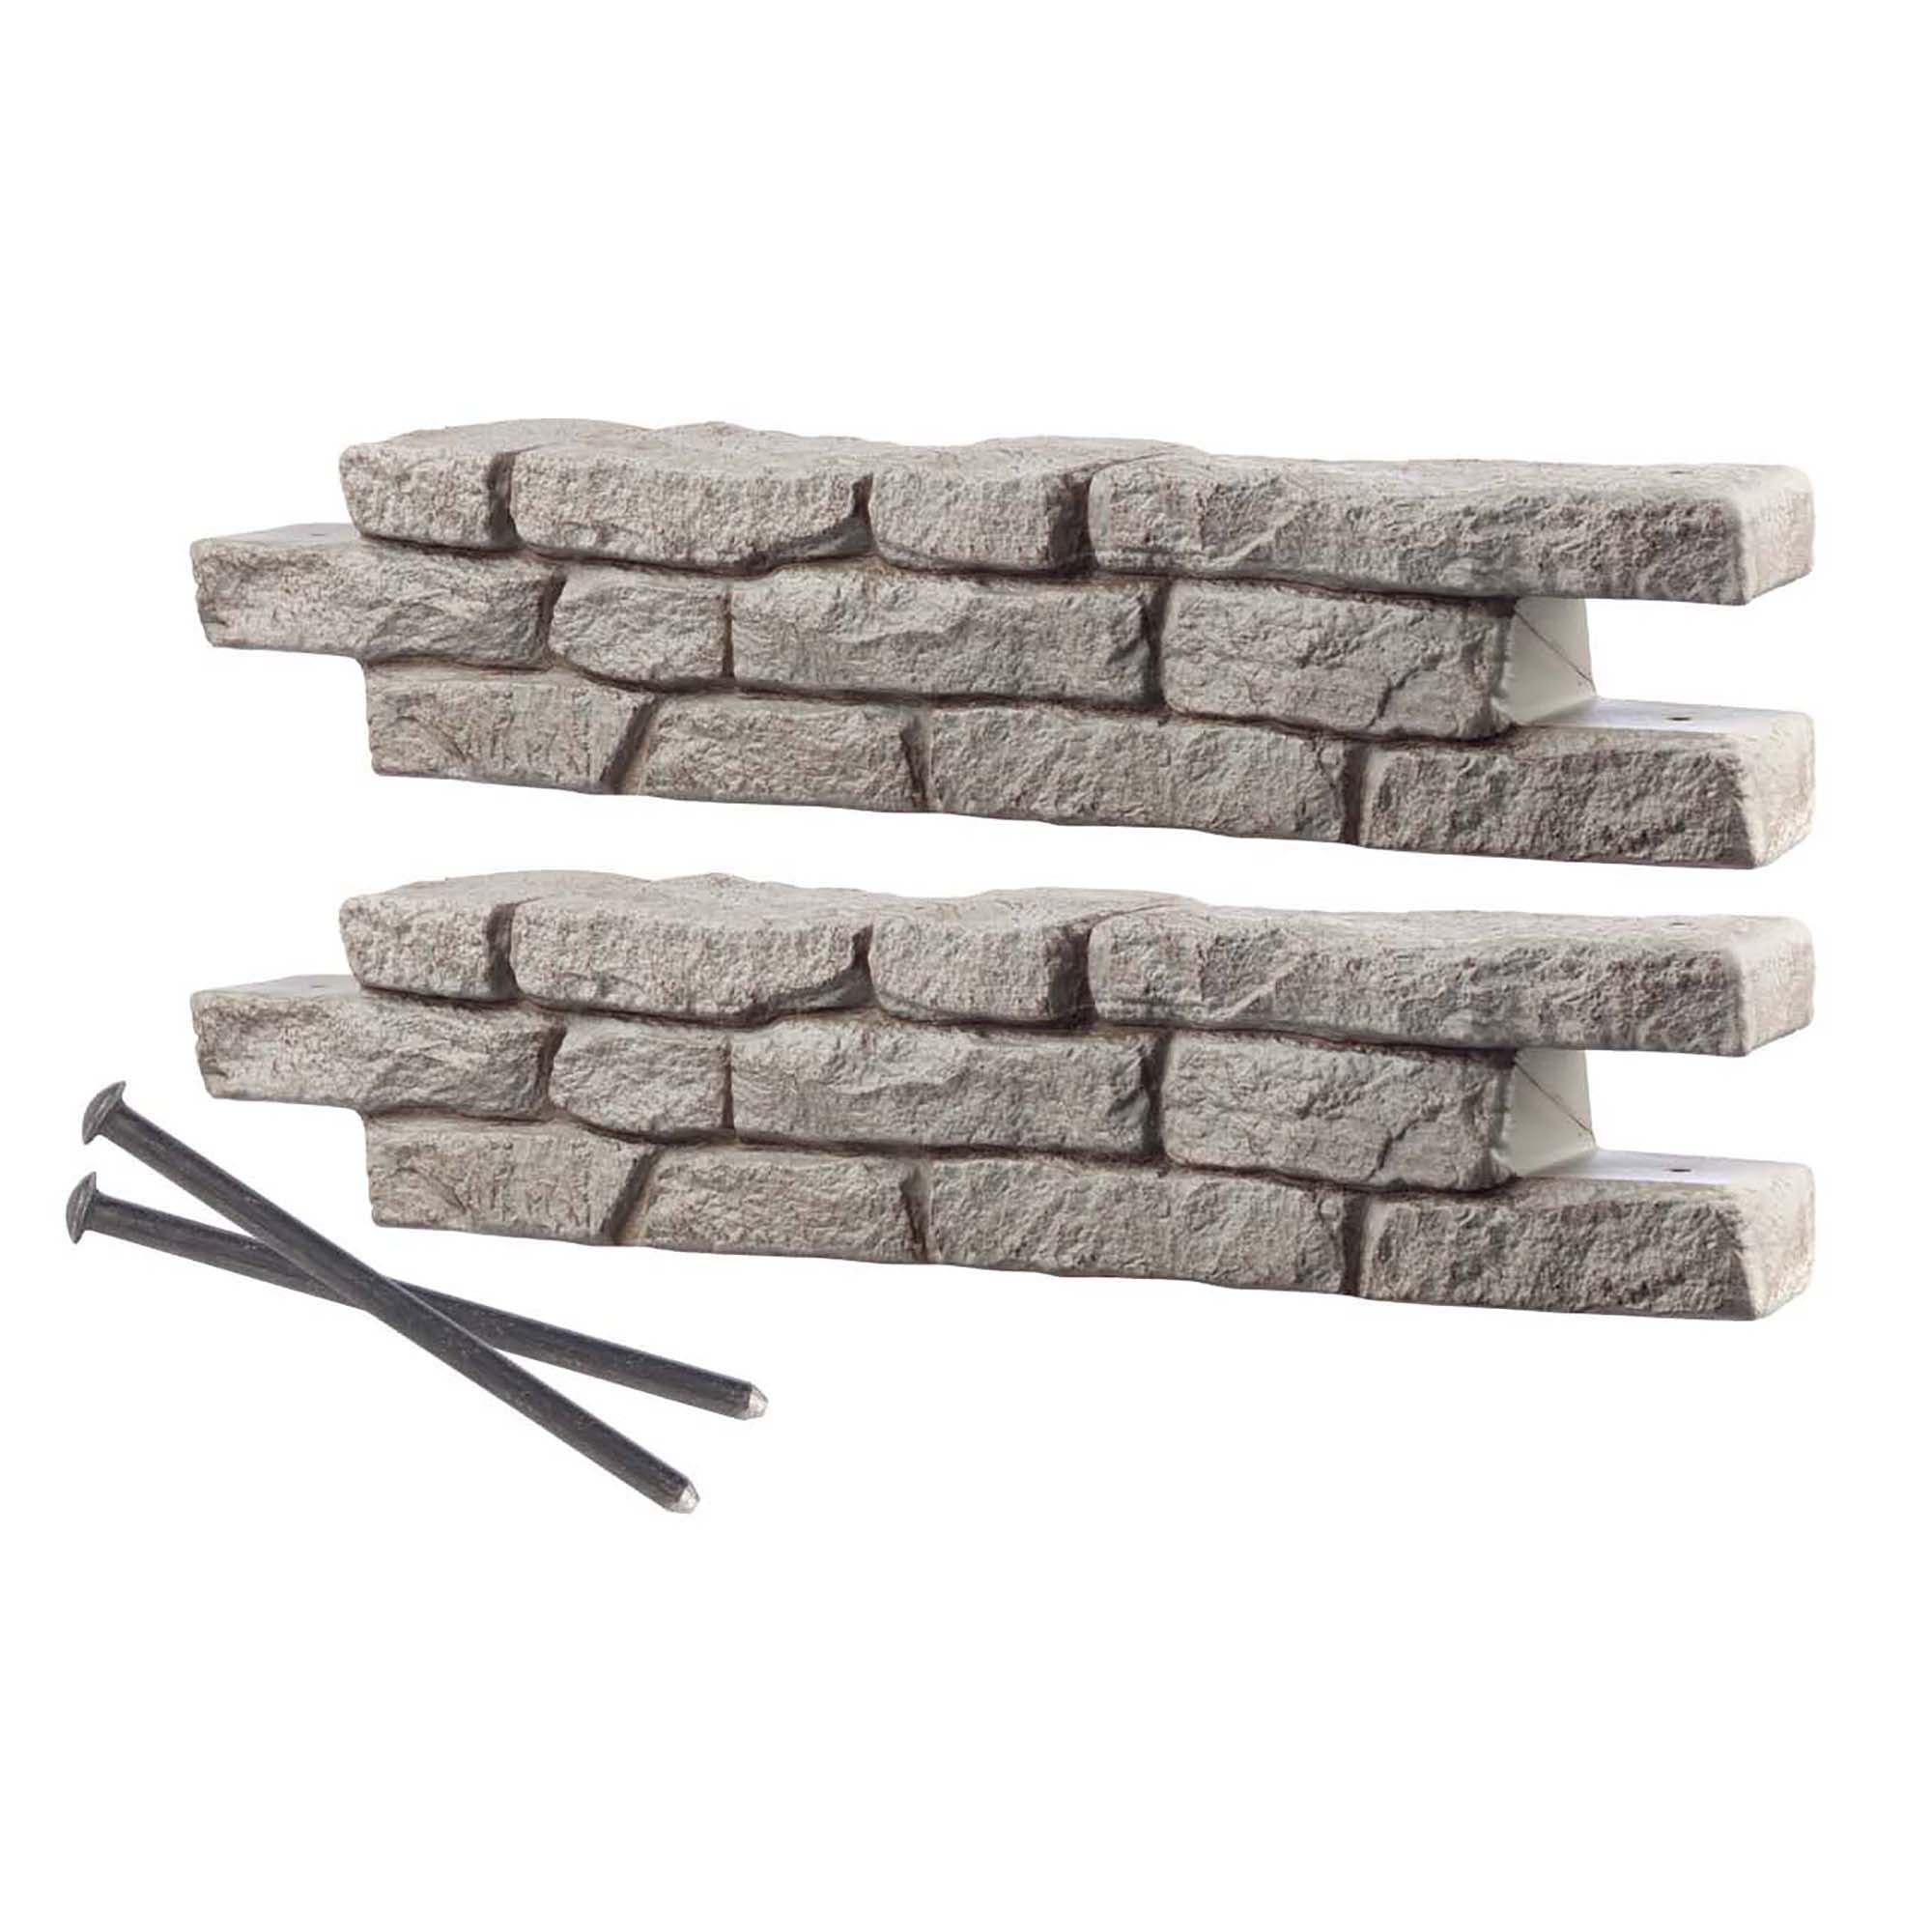 Two straight pieces of rock lock and two 18 inch spikes on a white background